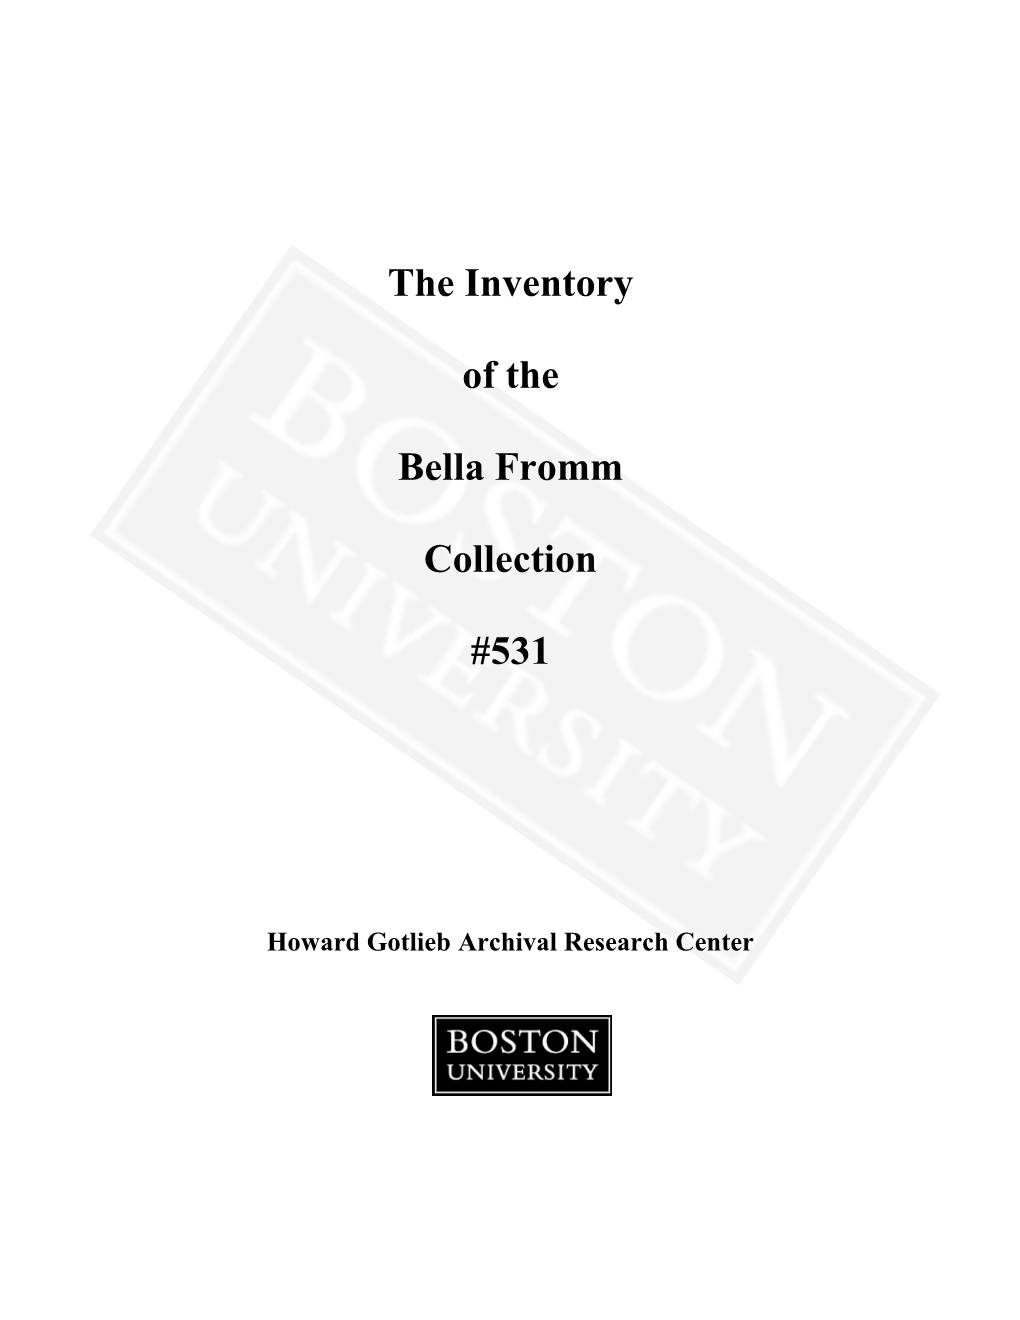 The Inventory of the Bella Fromm Collection #531